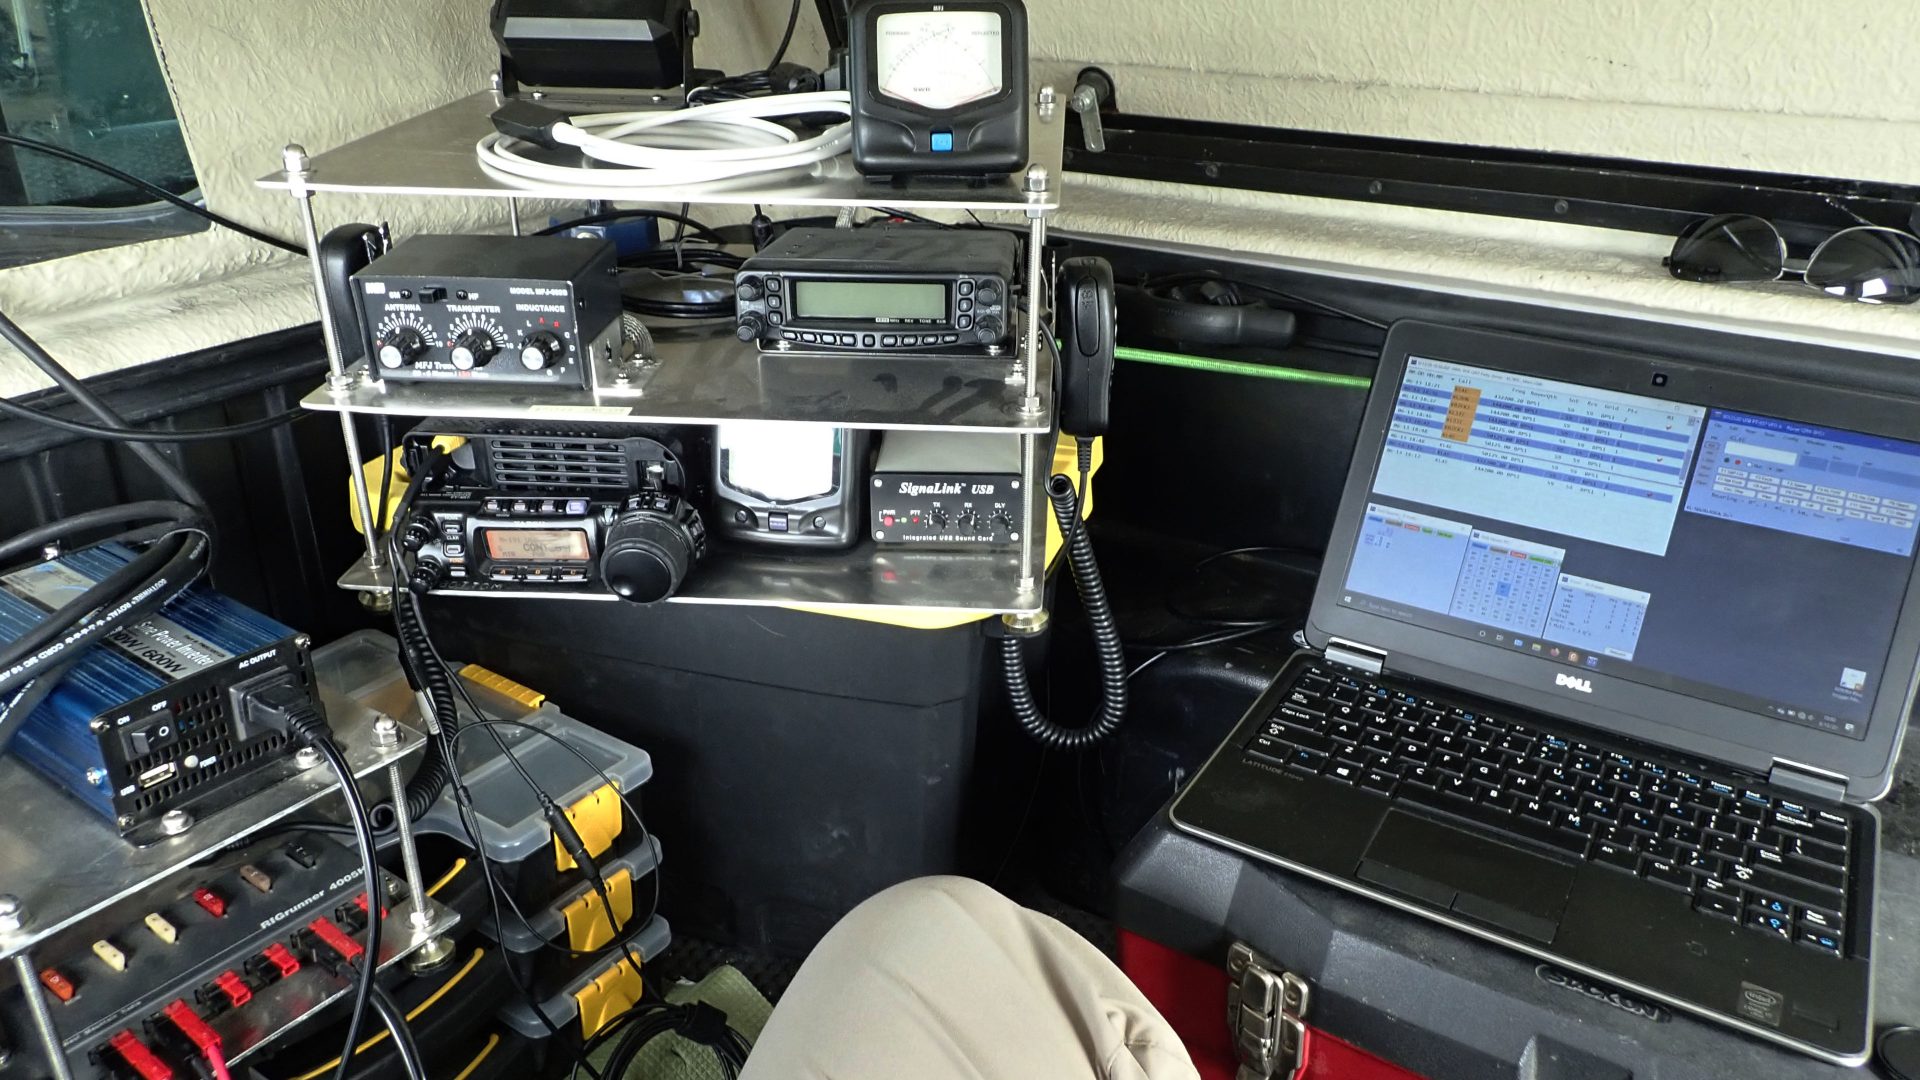 Mobile ham radio station in theq back of a truck